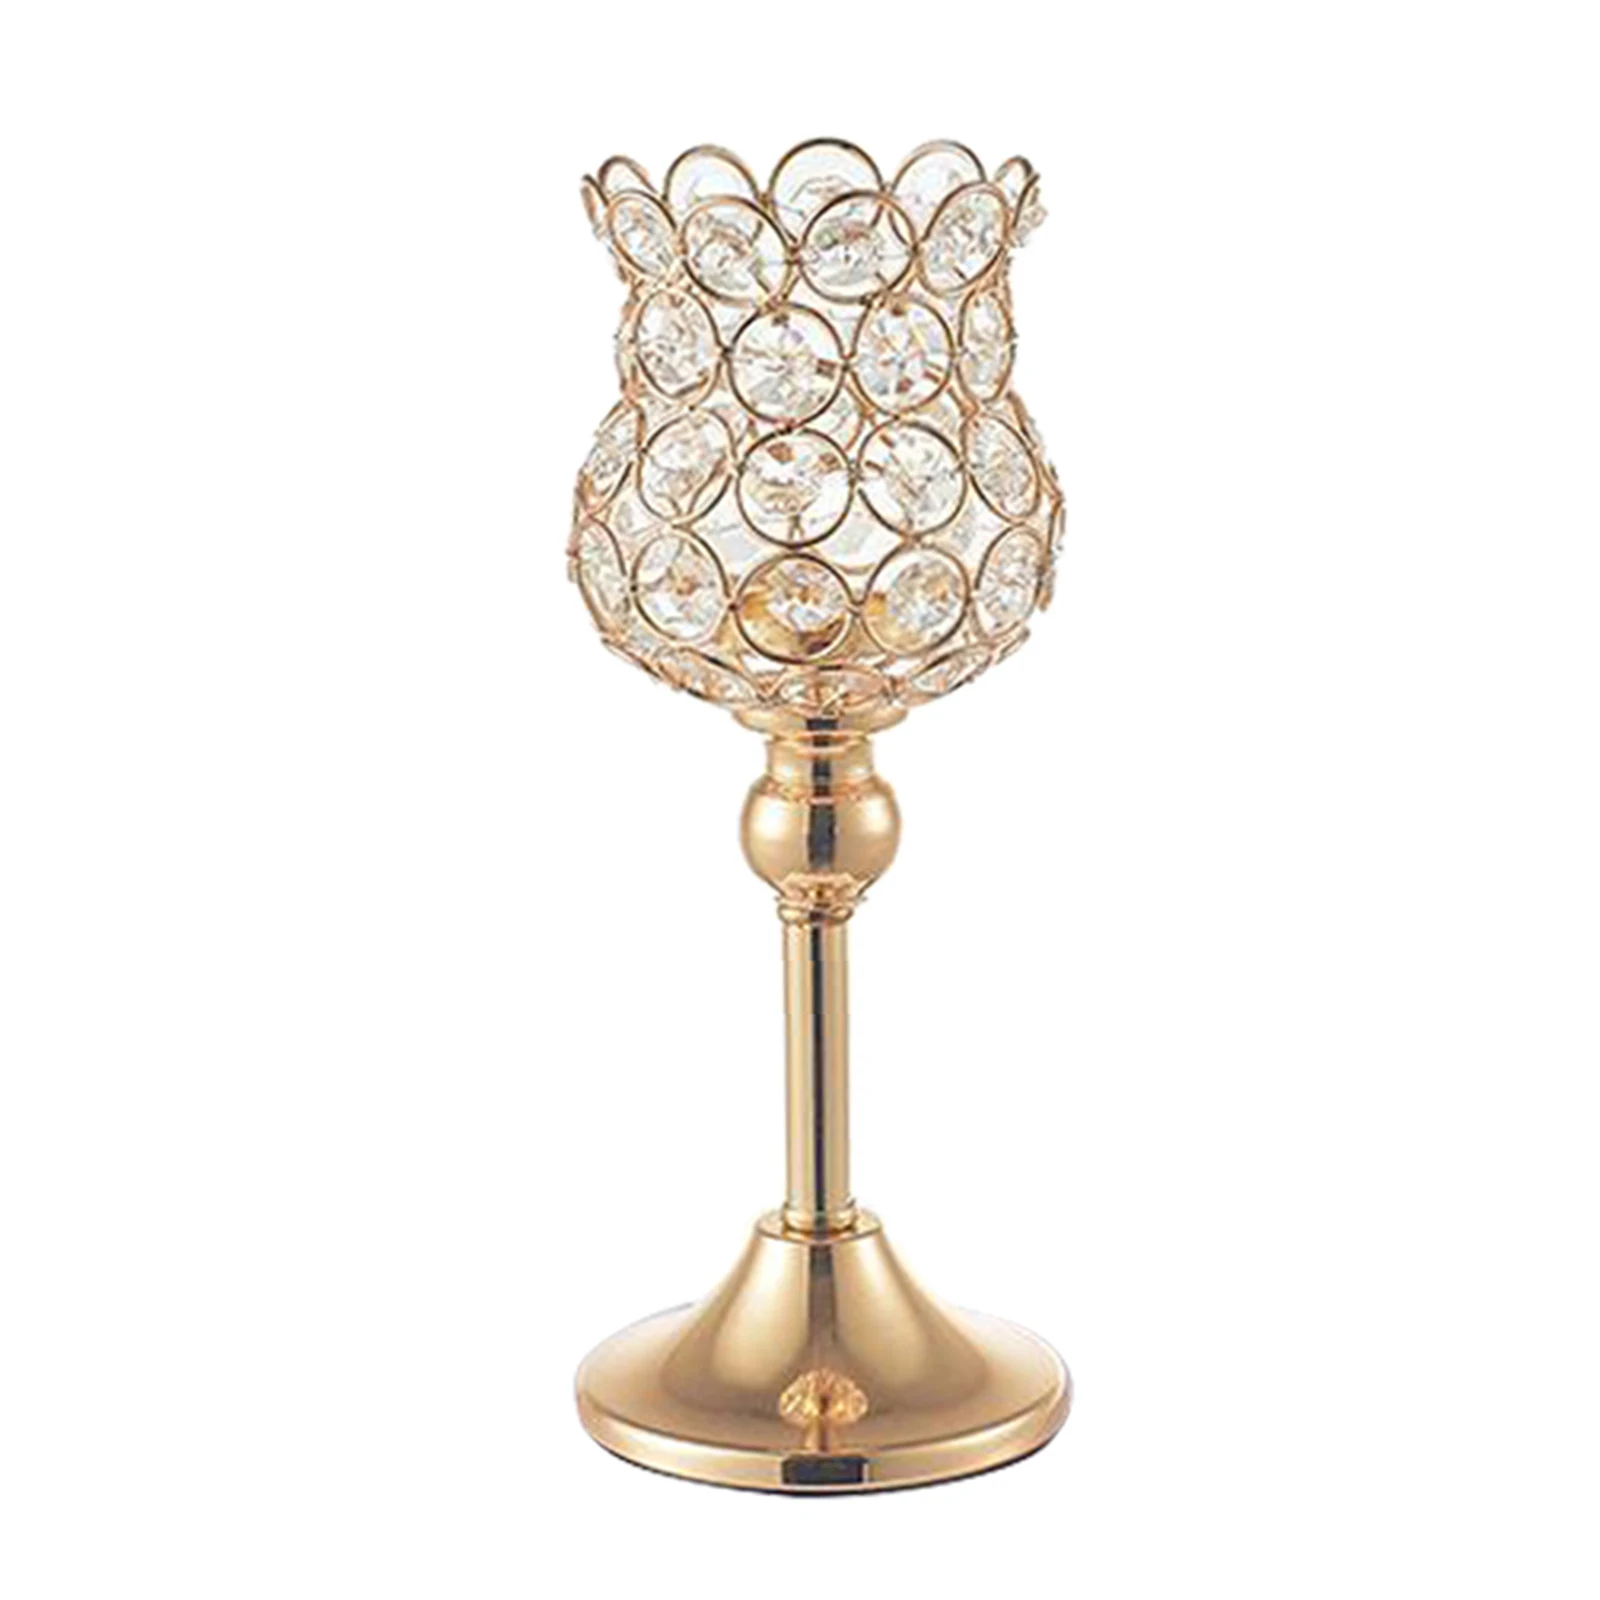 Home Decor Centerpiece Gold Crystal Candle Holders Dinner 